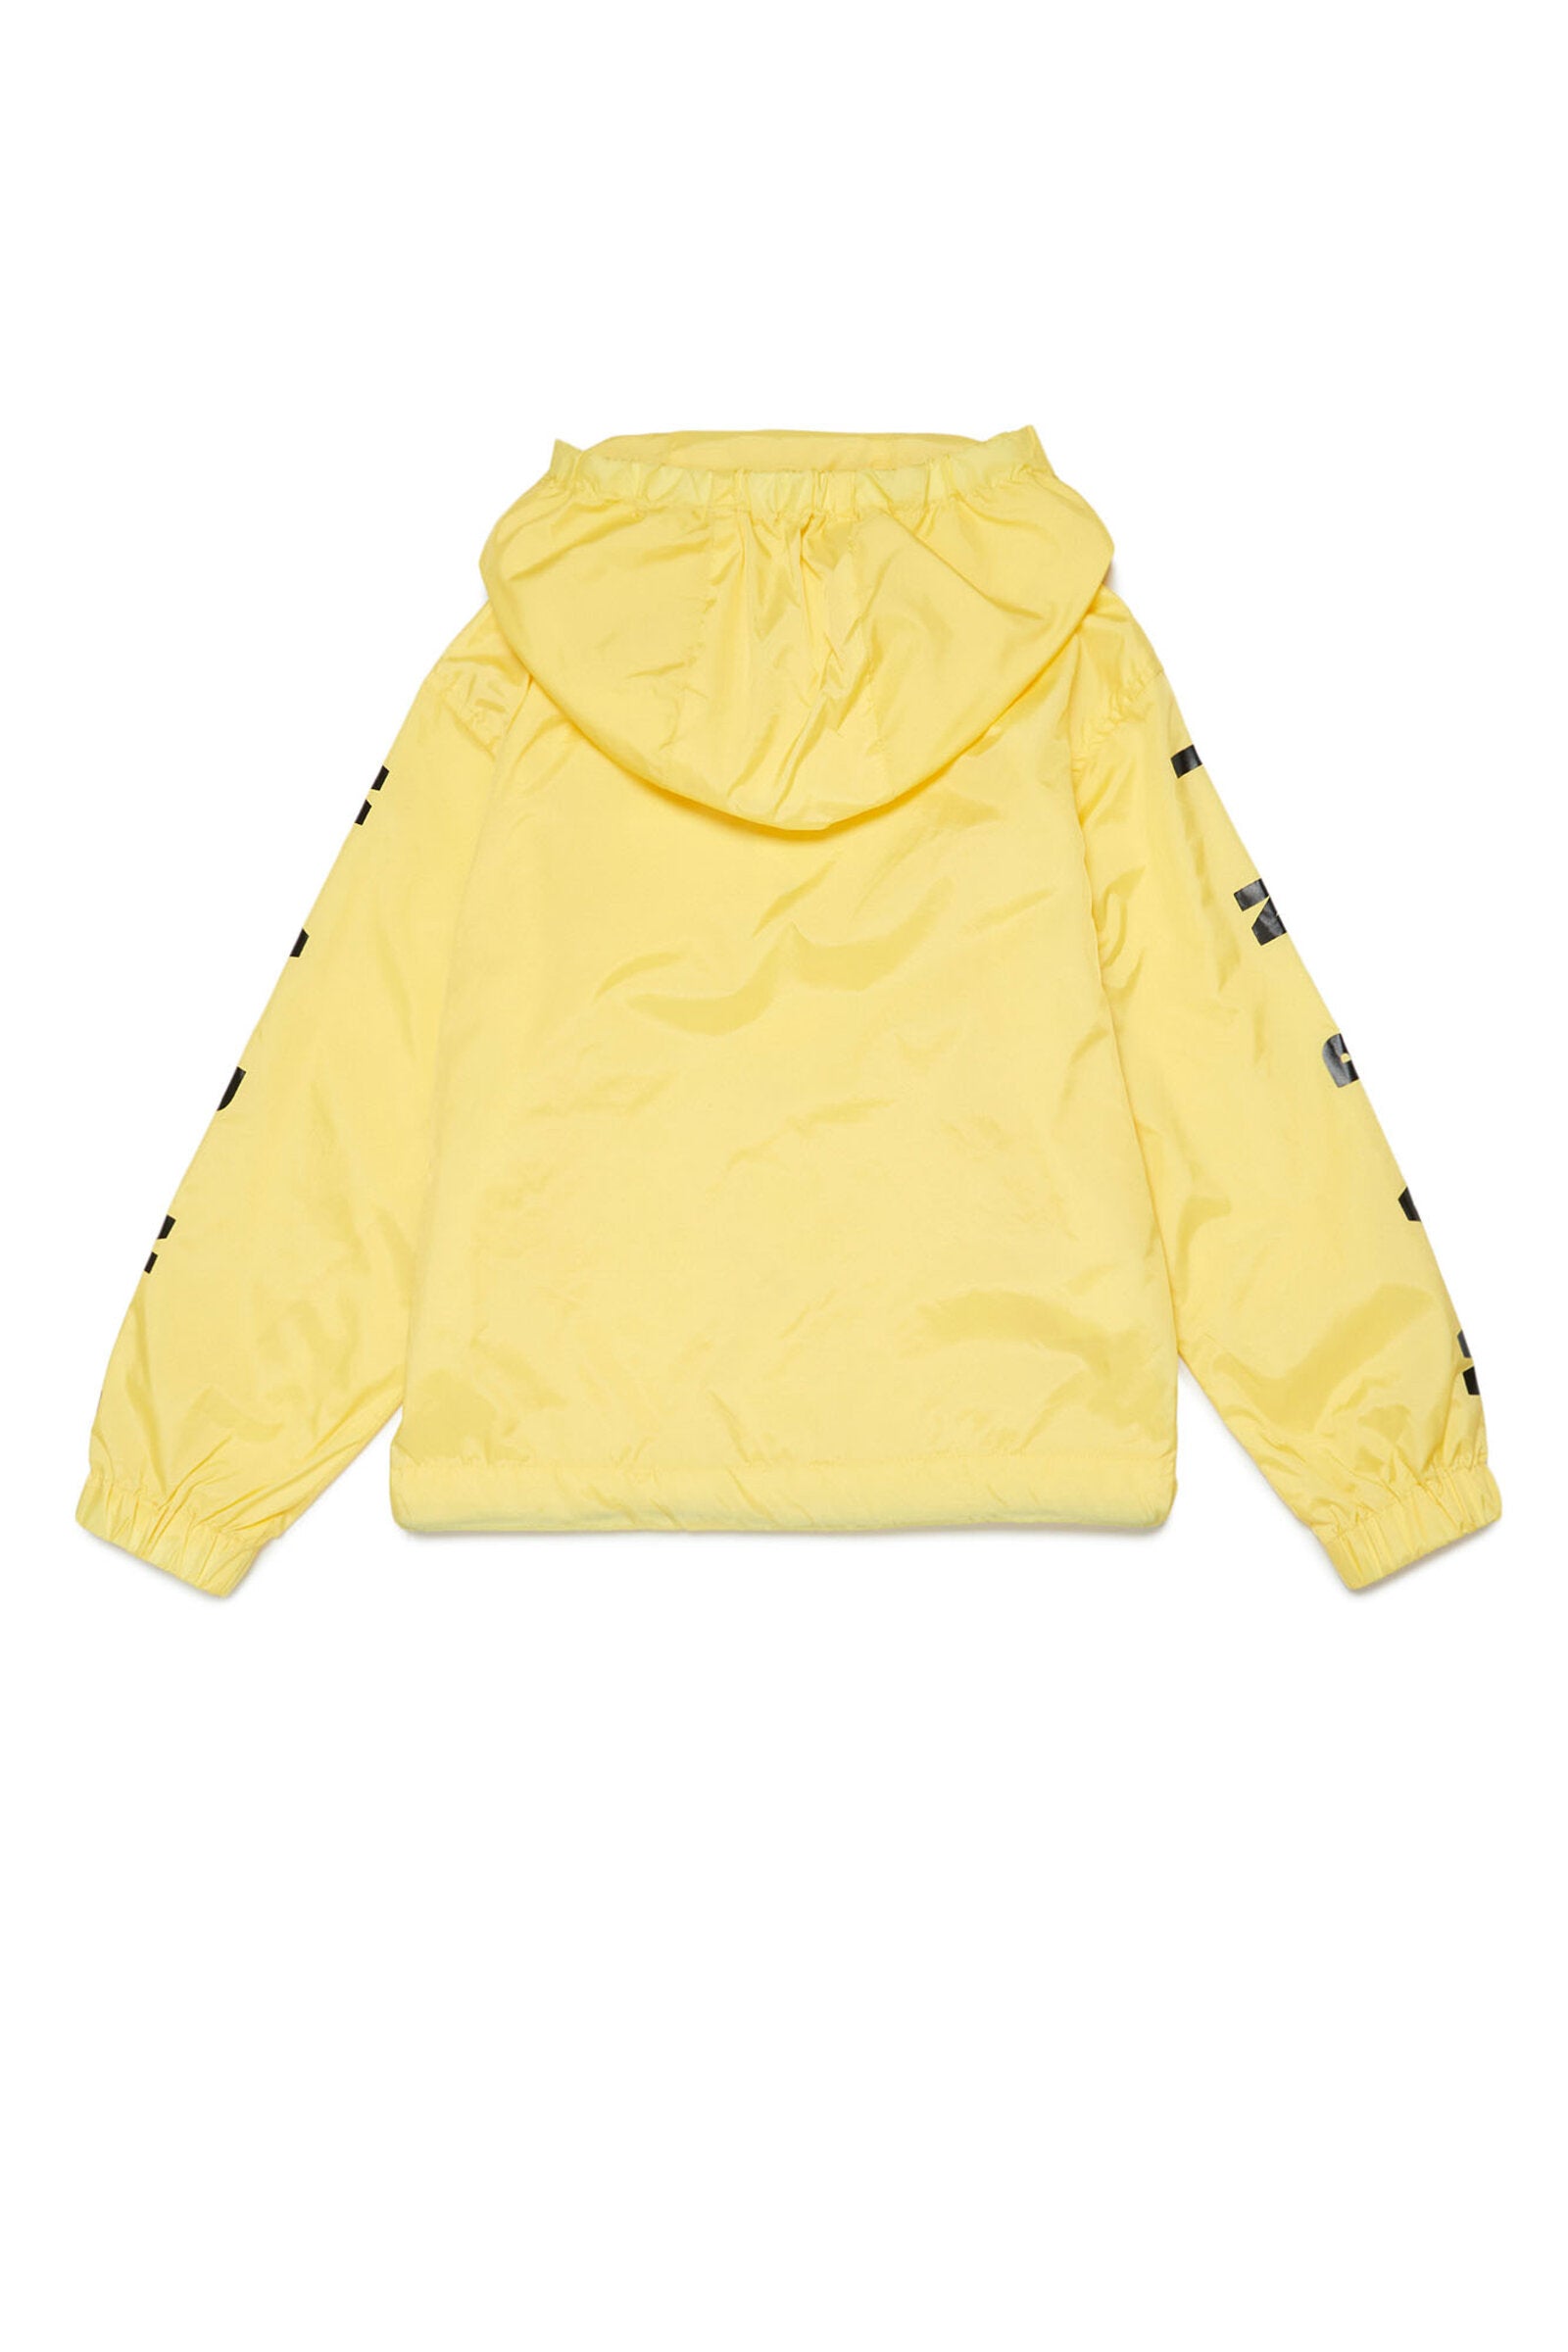 Marni yellow waterproof hooded jacket with button fastening and